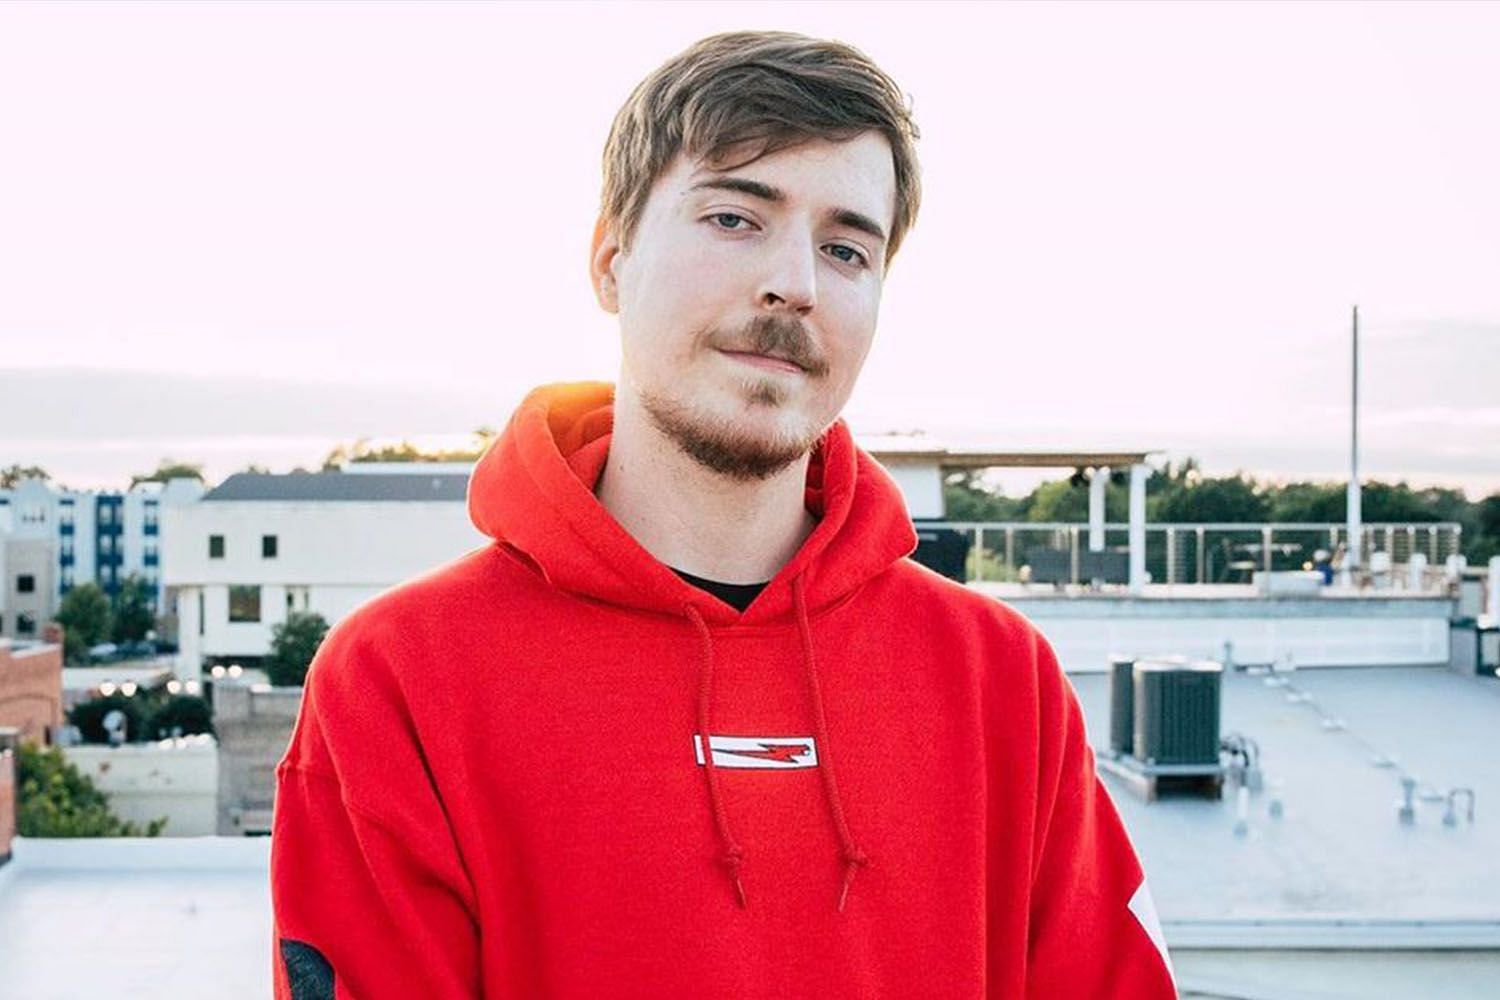 The YouTuber revealed that he was struggling after his COVID-19 recovery. (Image via MrBeast, YouTube)